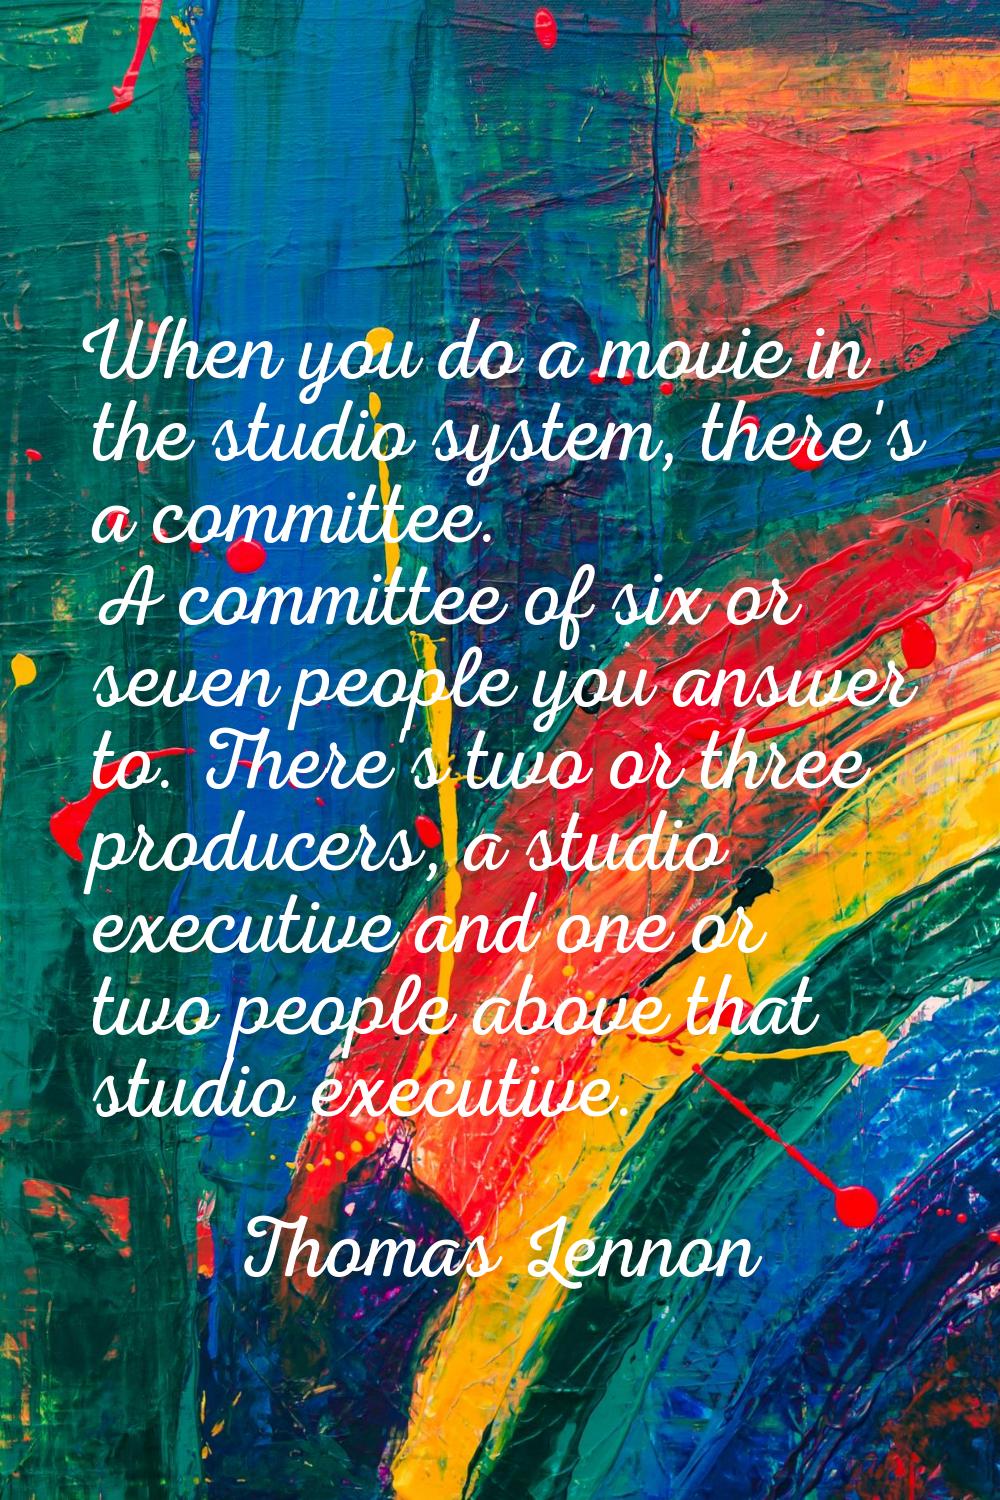 When you do a movie in the studio system, there's a committee. A committee of six or seven people y